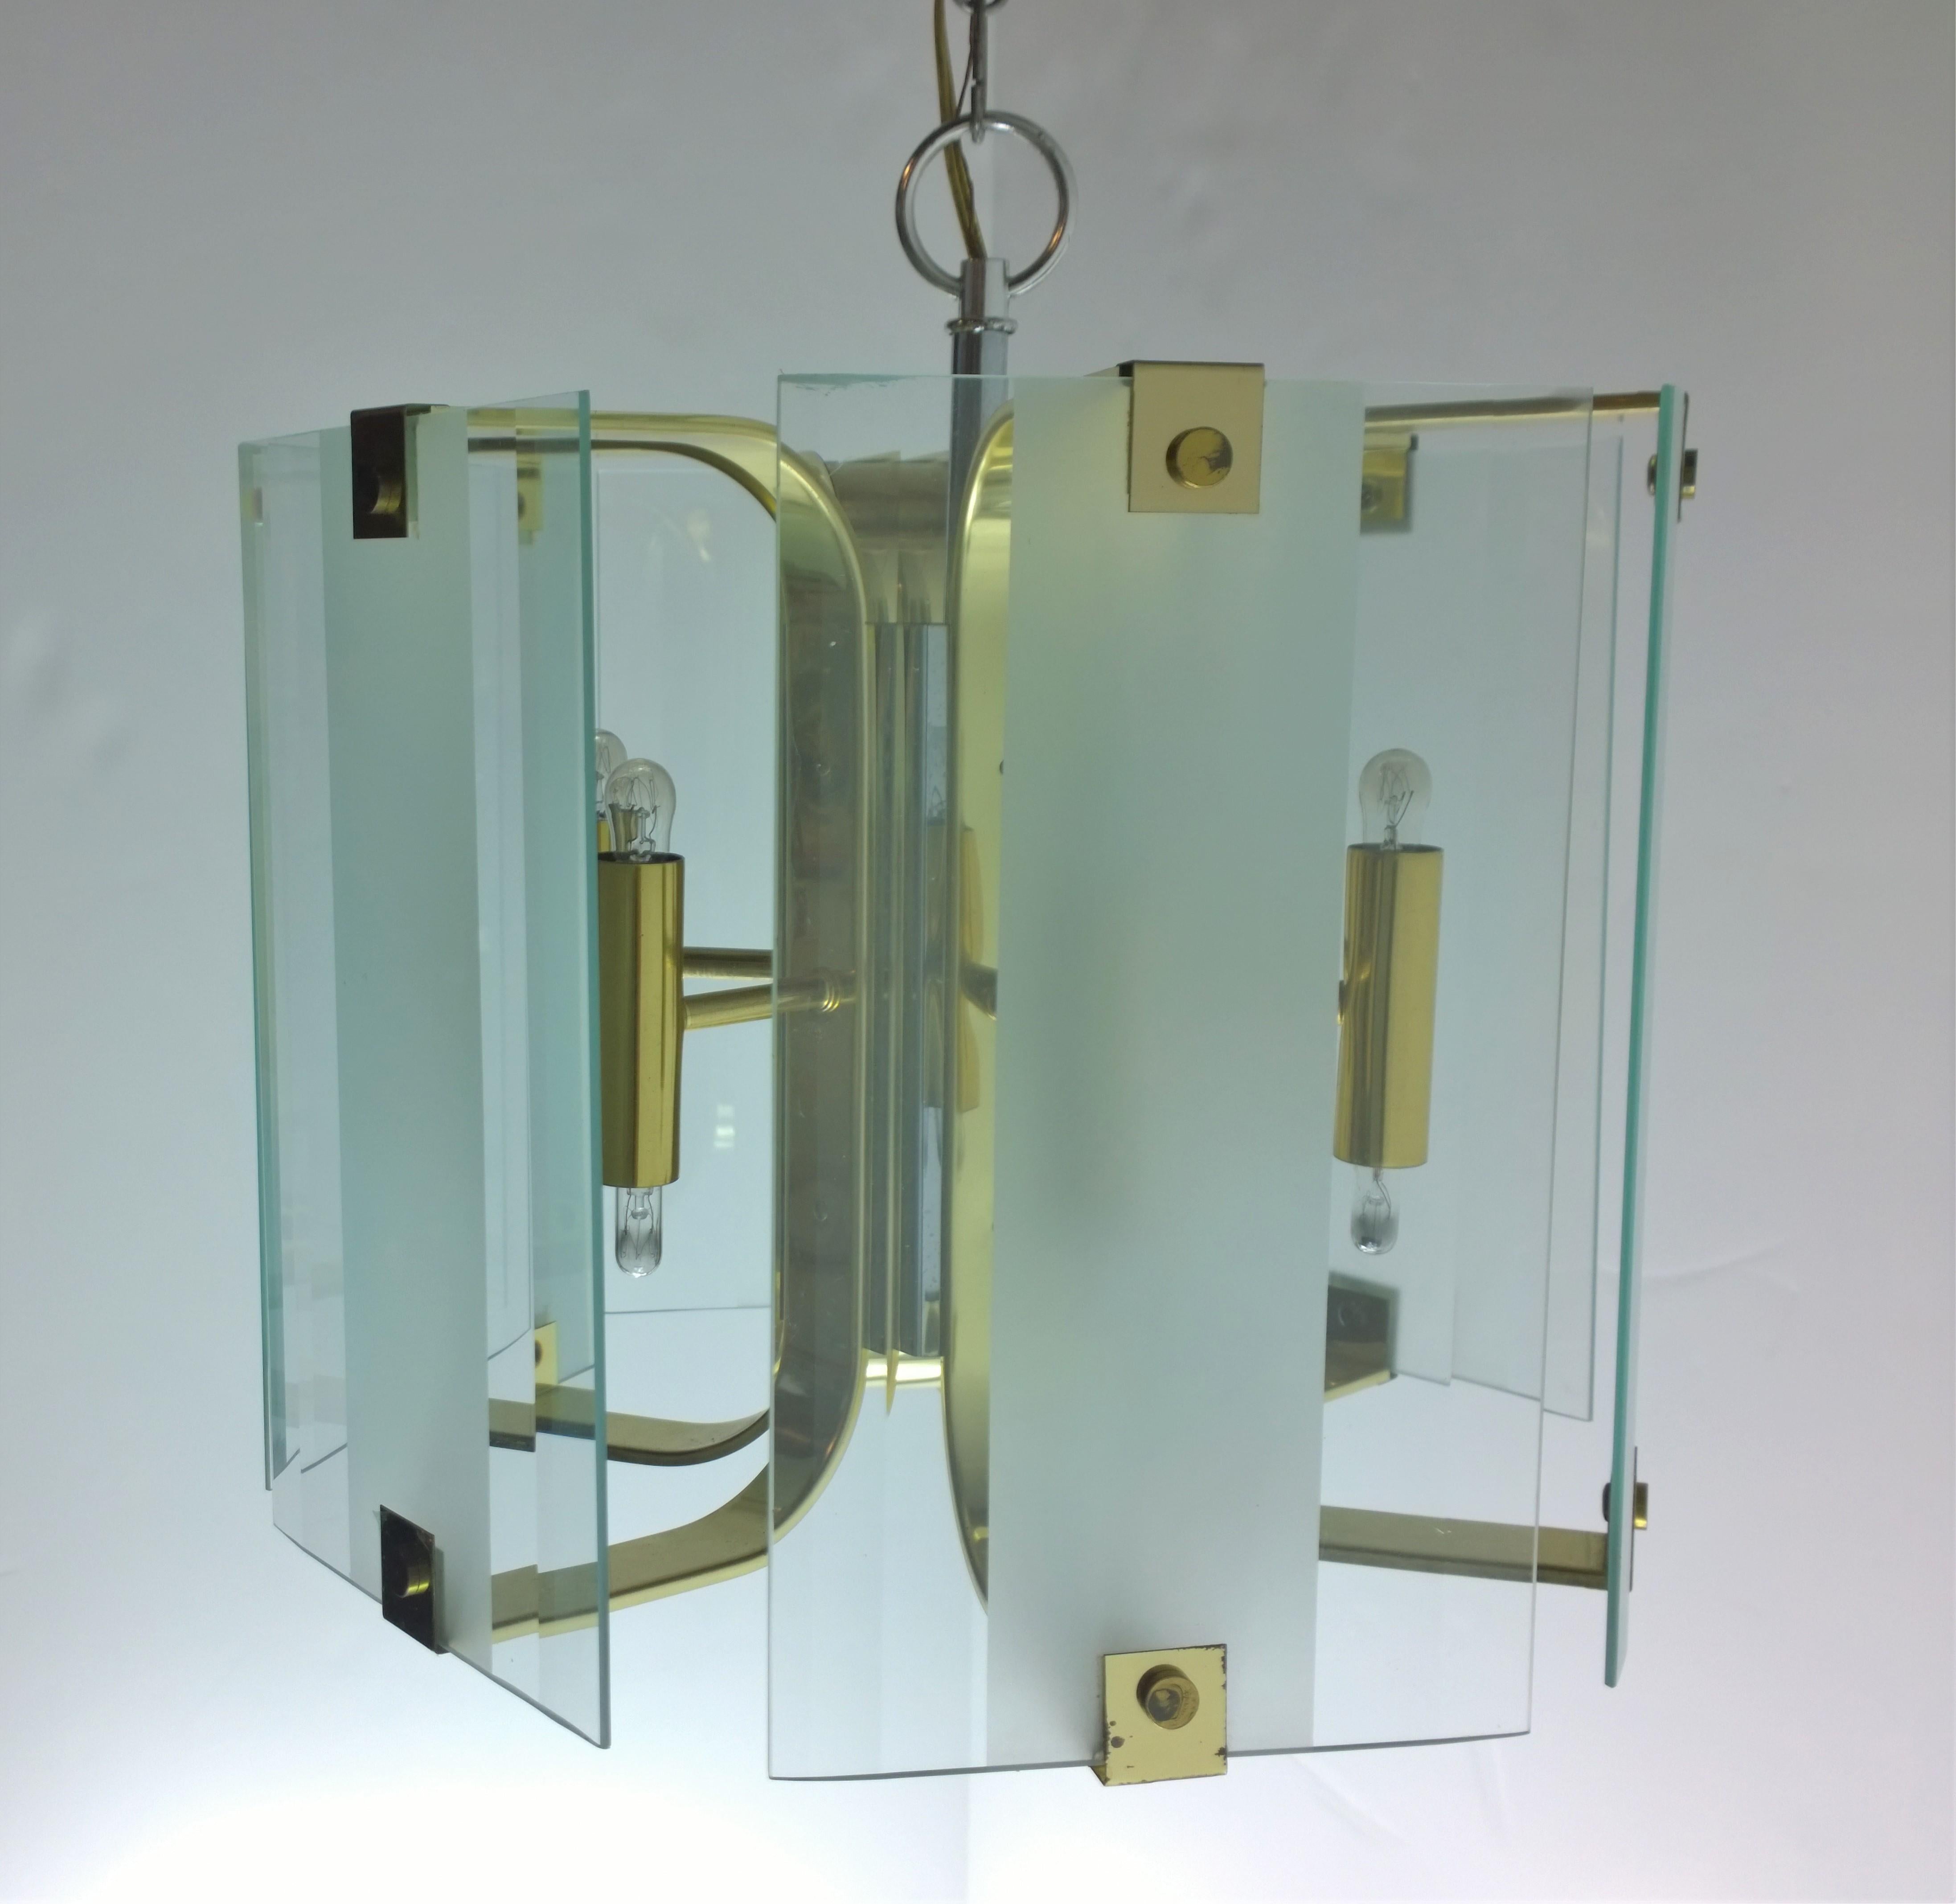 Offered is a Mid-Century Modern clear and frosted glass and brass chandelier by Fredrick Raymond. This chandelier is a true example of Classic modern 1970s and 1980s design. This sophisticated and chic fixture has six glass panels alternating